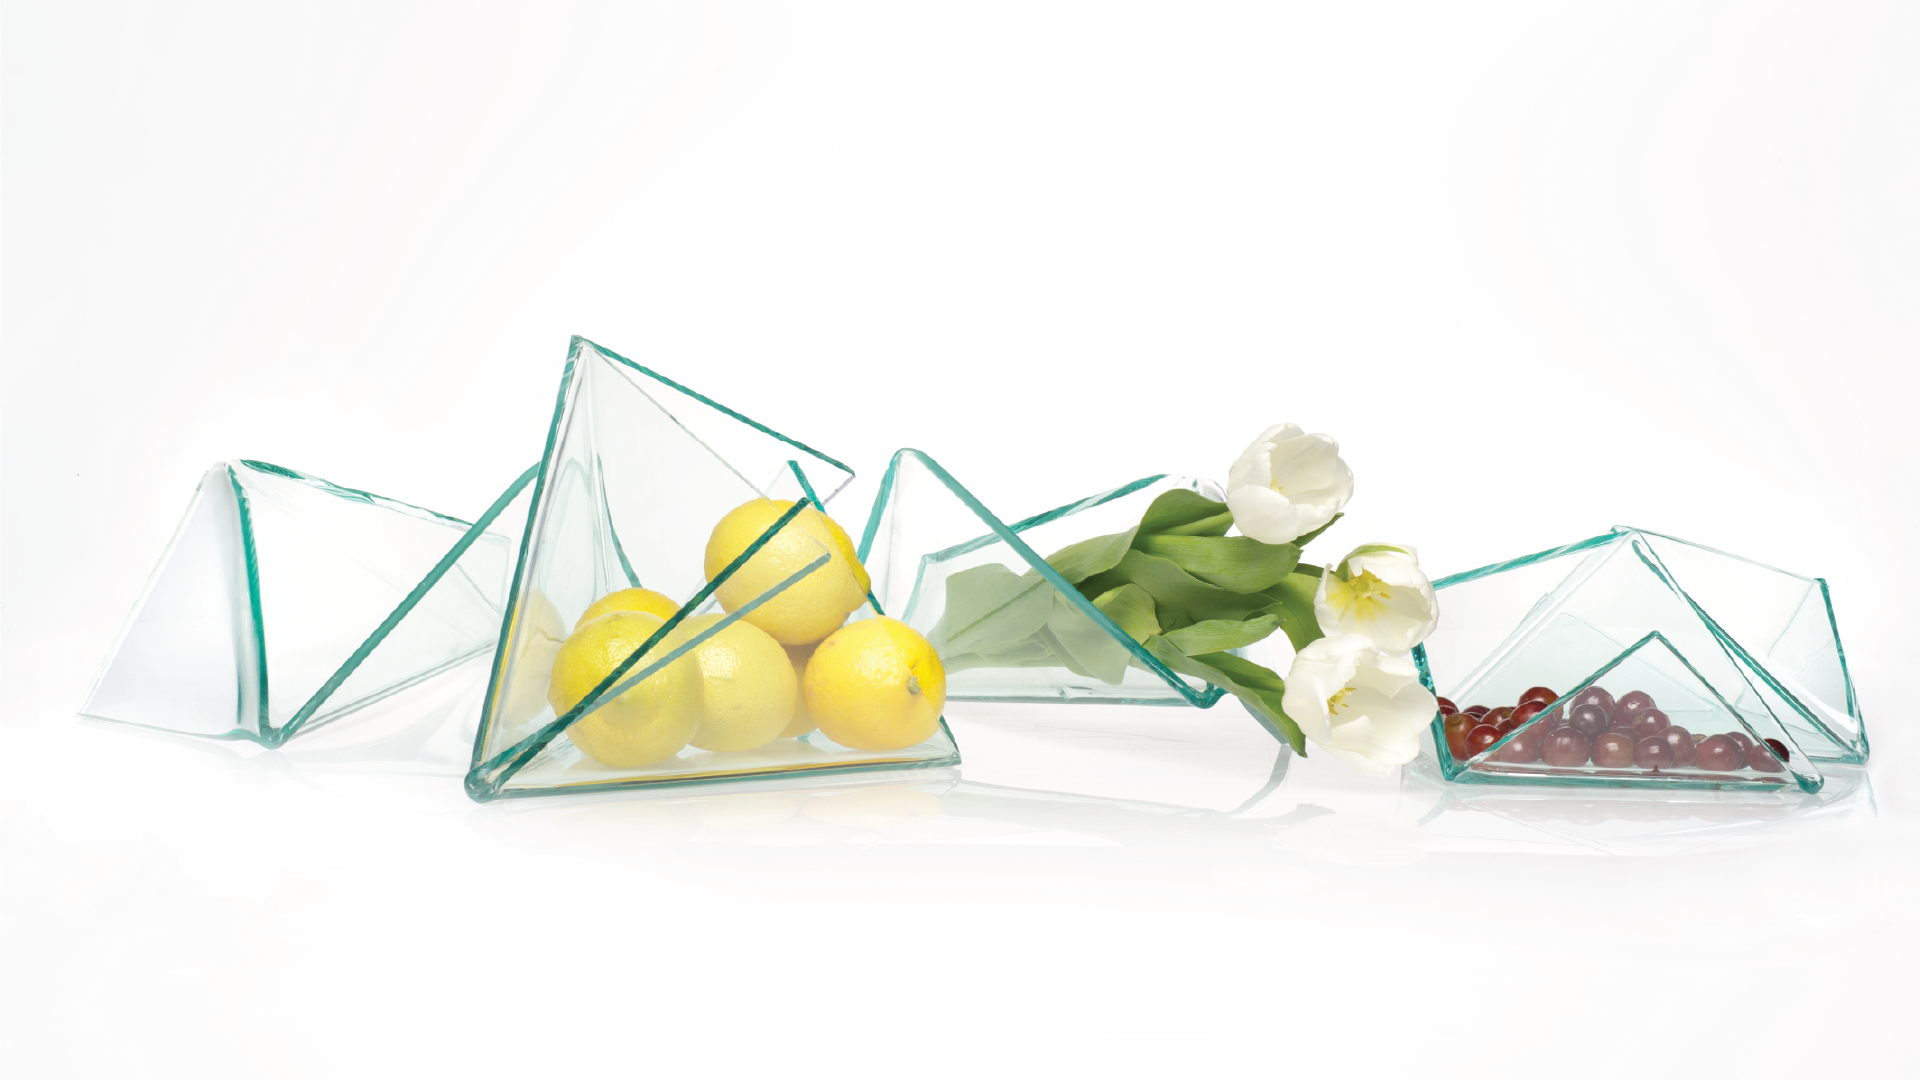 Four countertop center-pieces made of folded glass sheets containing limes, flowers and small fruits.